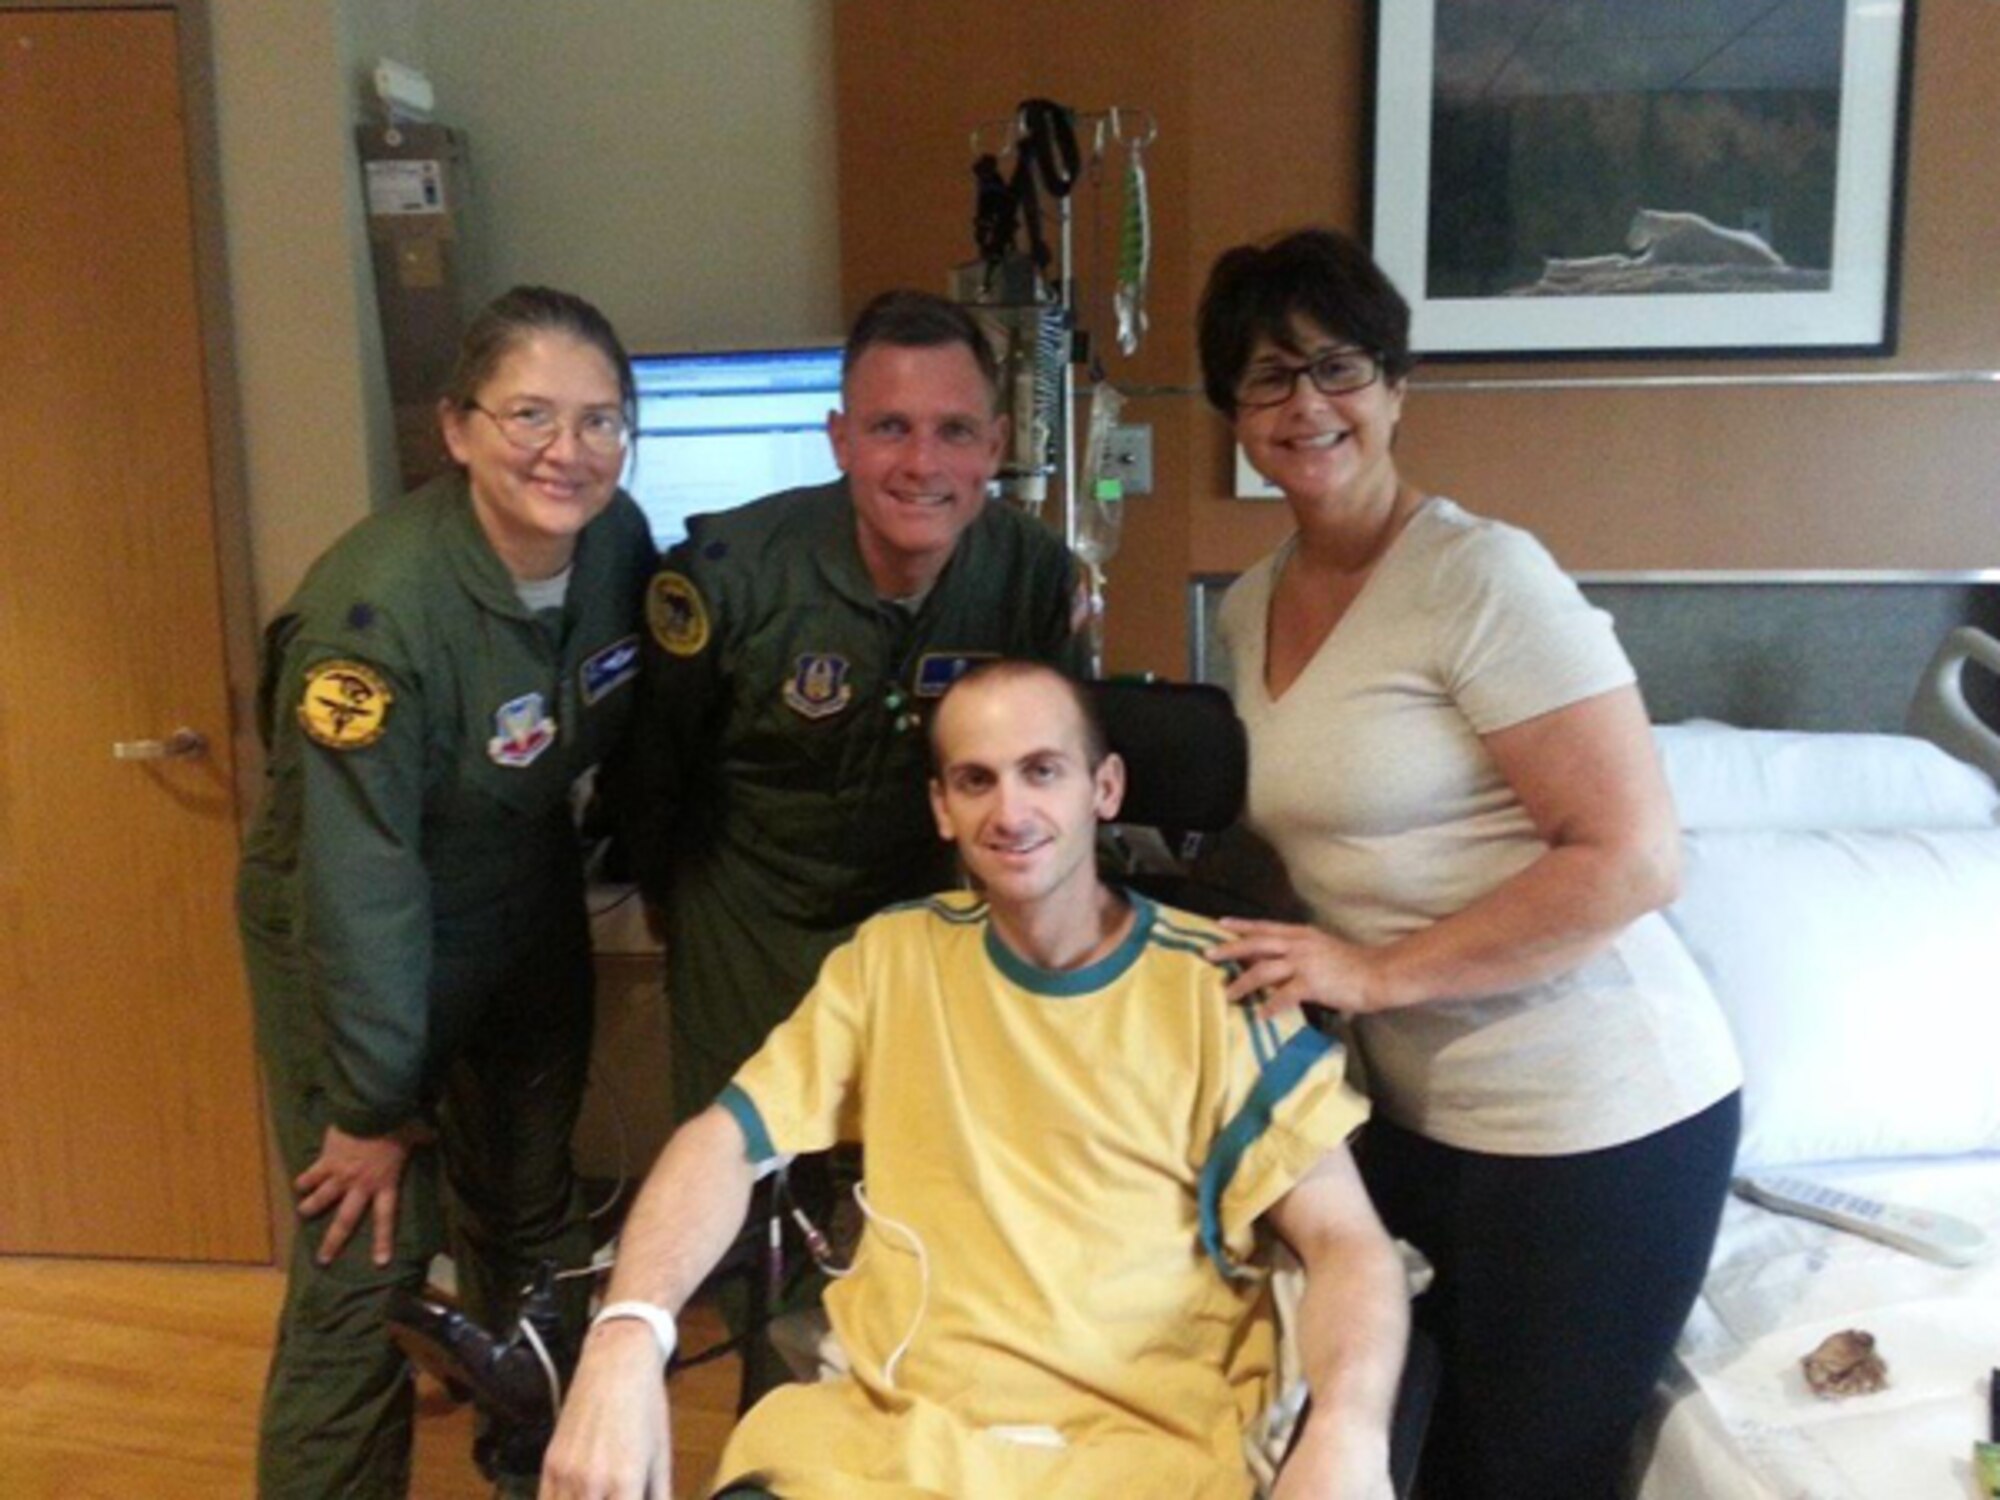 Members of the 10th Expeditionary Aeromedical Evacuation Flight Critical Care Air Transport Team visit Levi Eaves and his mother Judy at Walter Reed National Military Medical Center. (Courtesy photo)